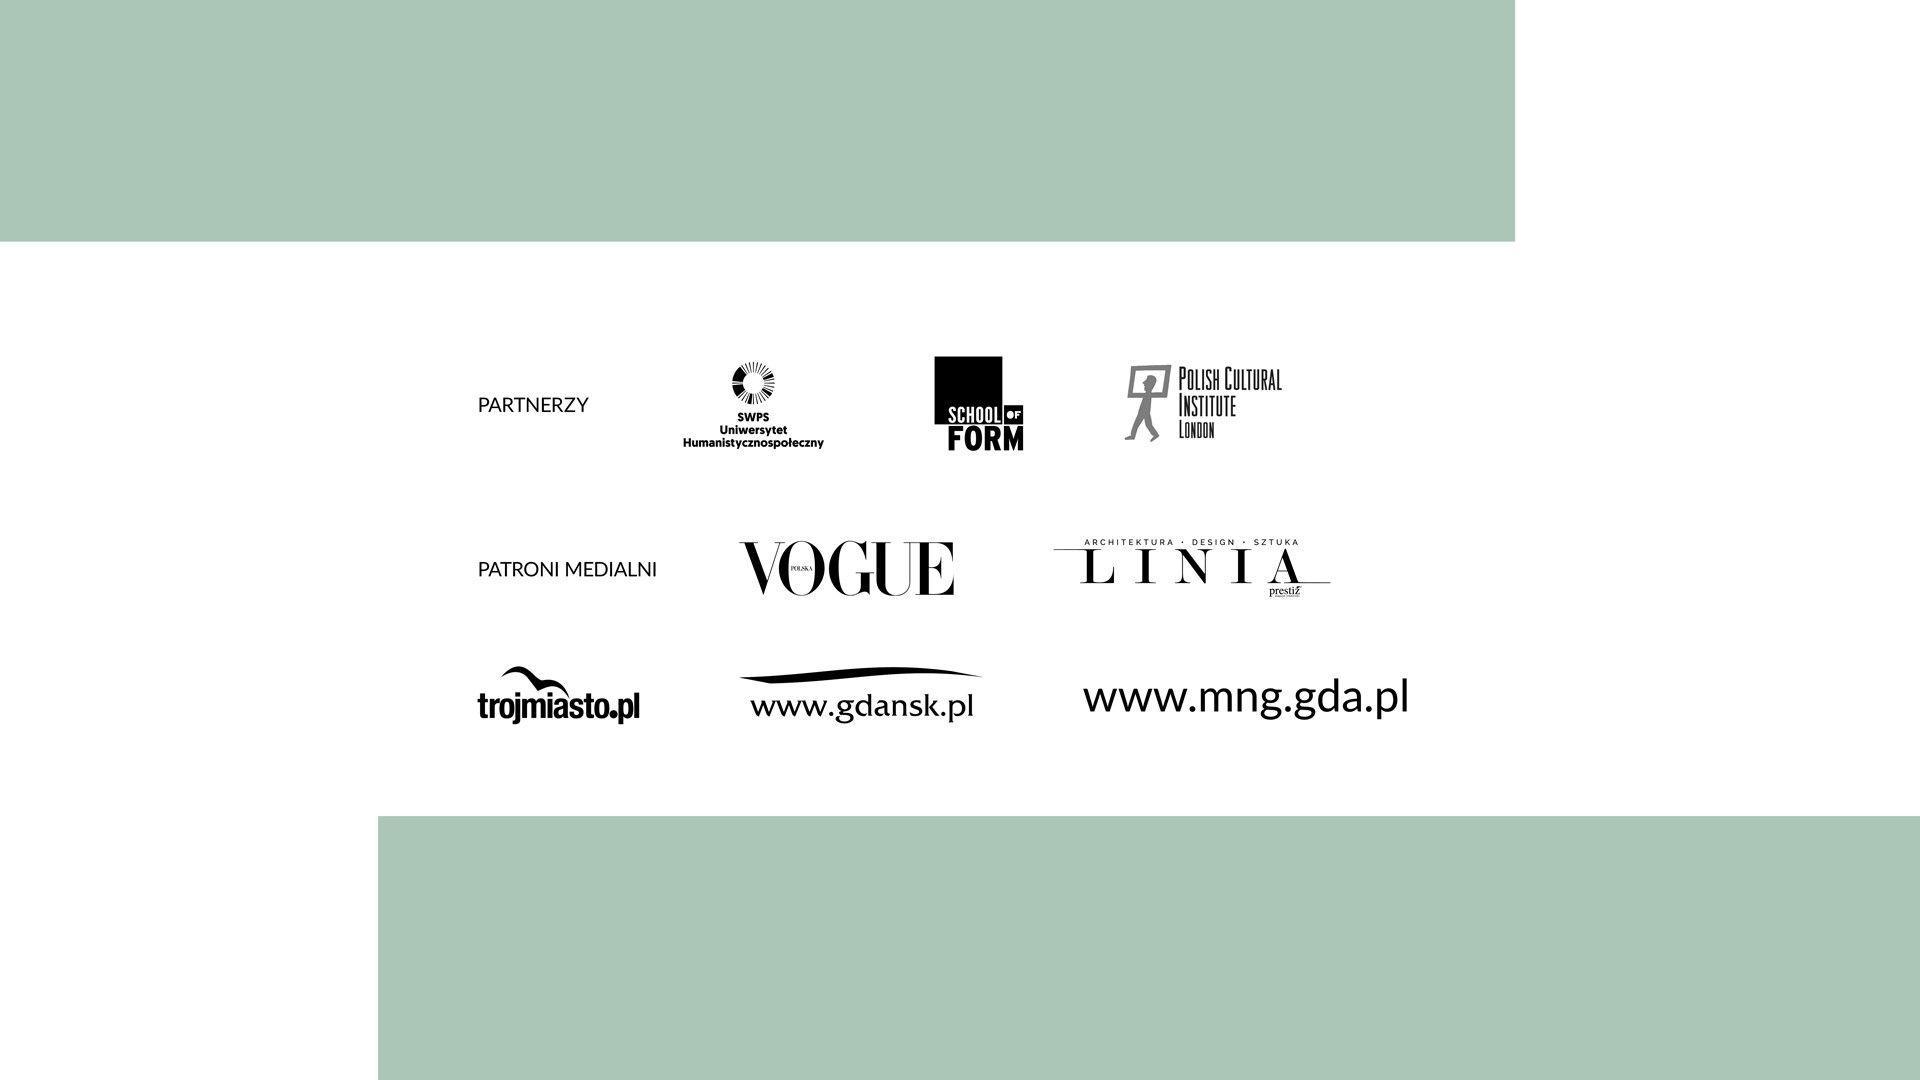 Logos of exhibition partners